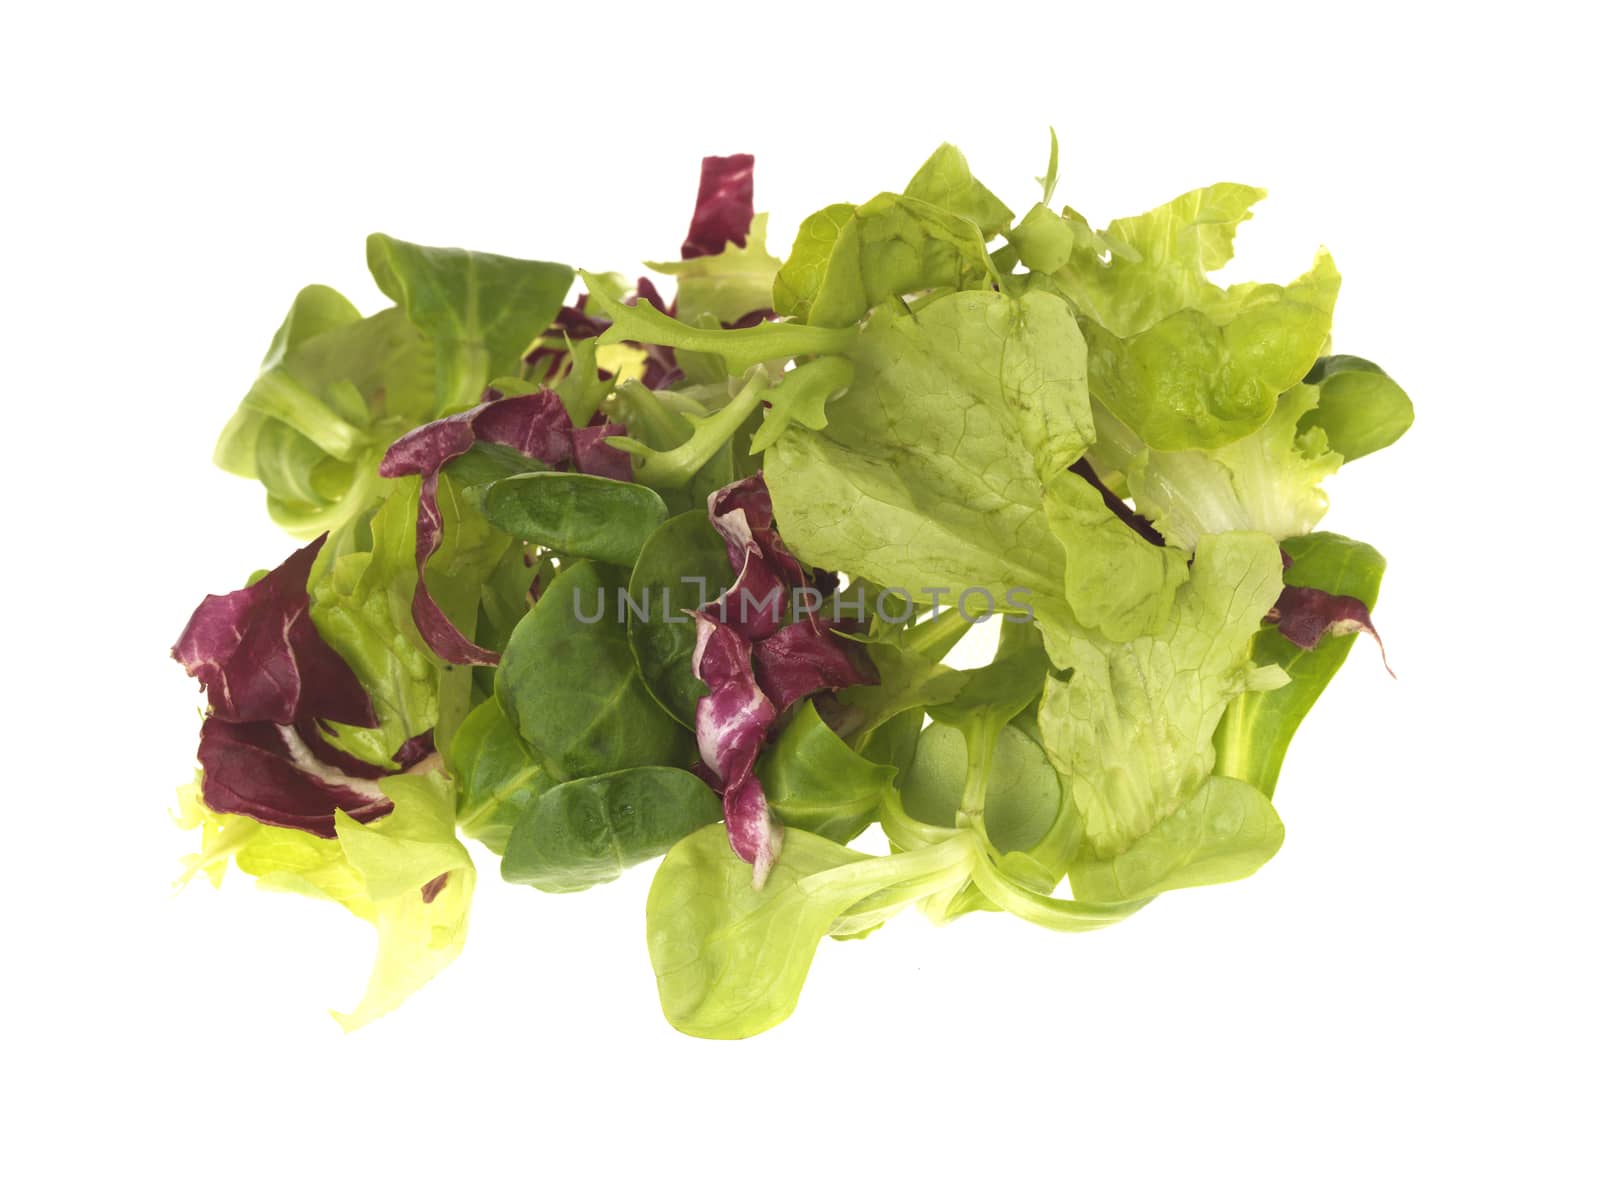 Mixed Salad Lettuce Leaves by Whiteboxmedia